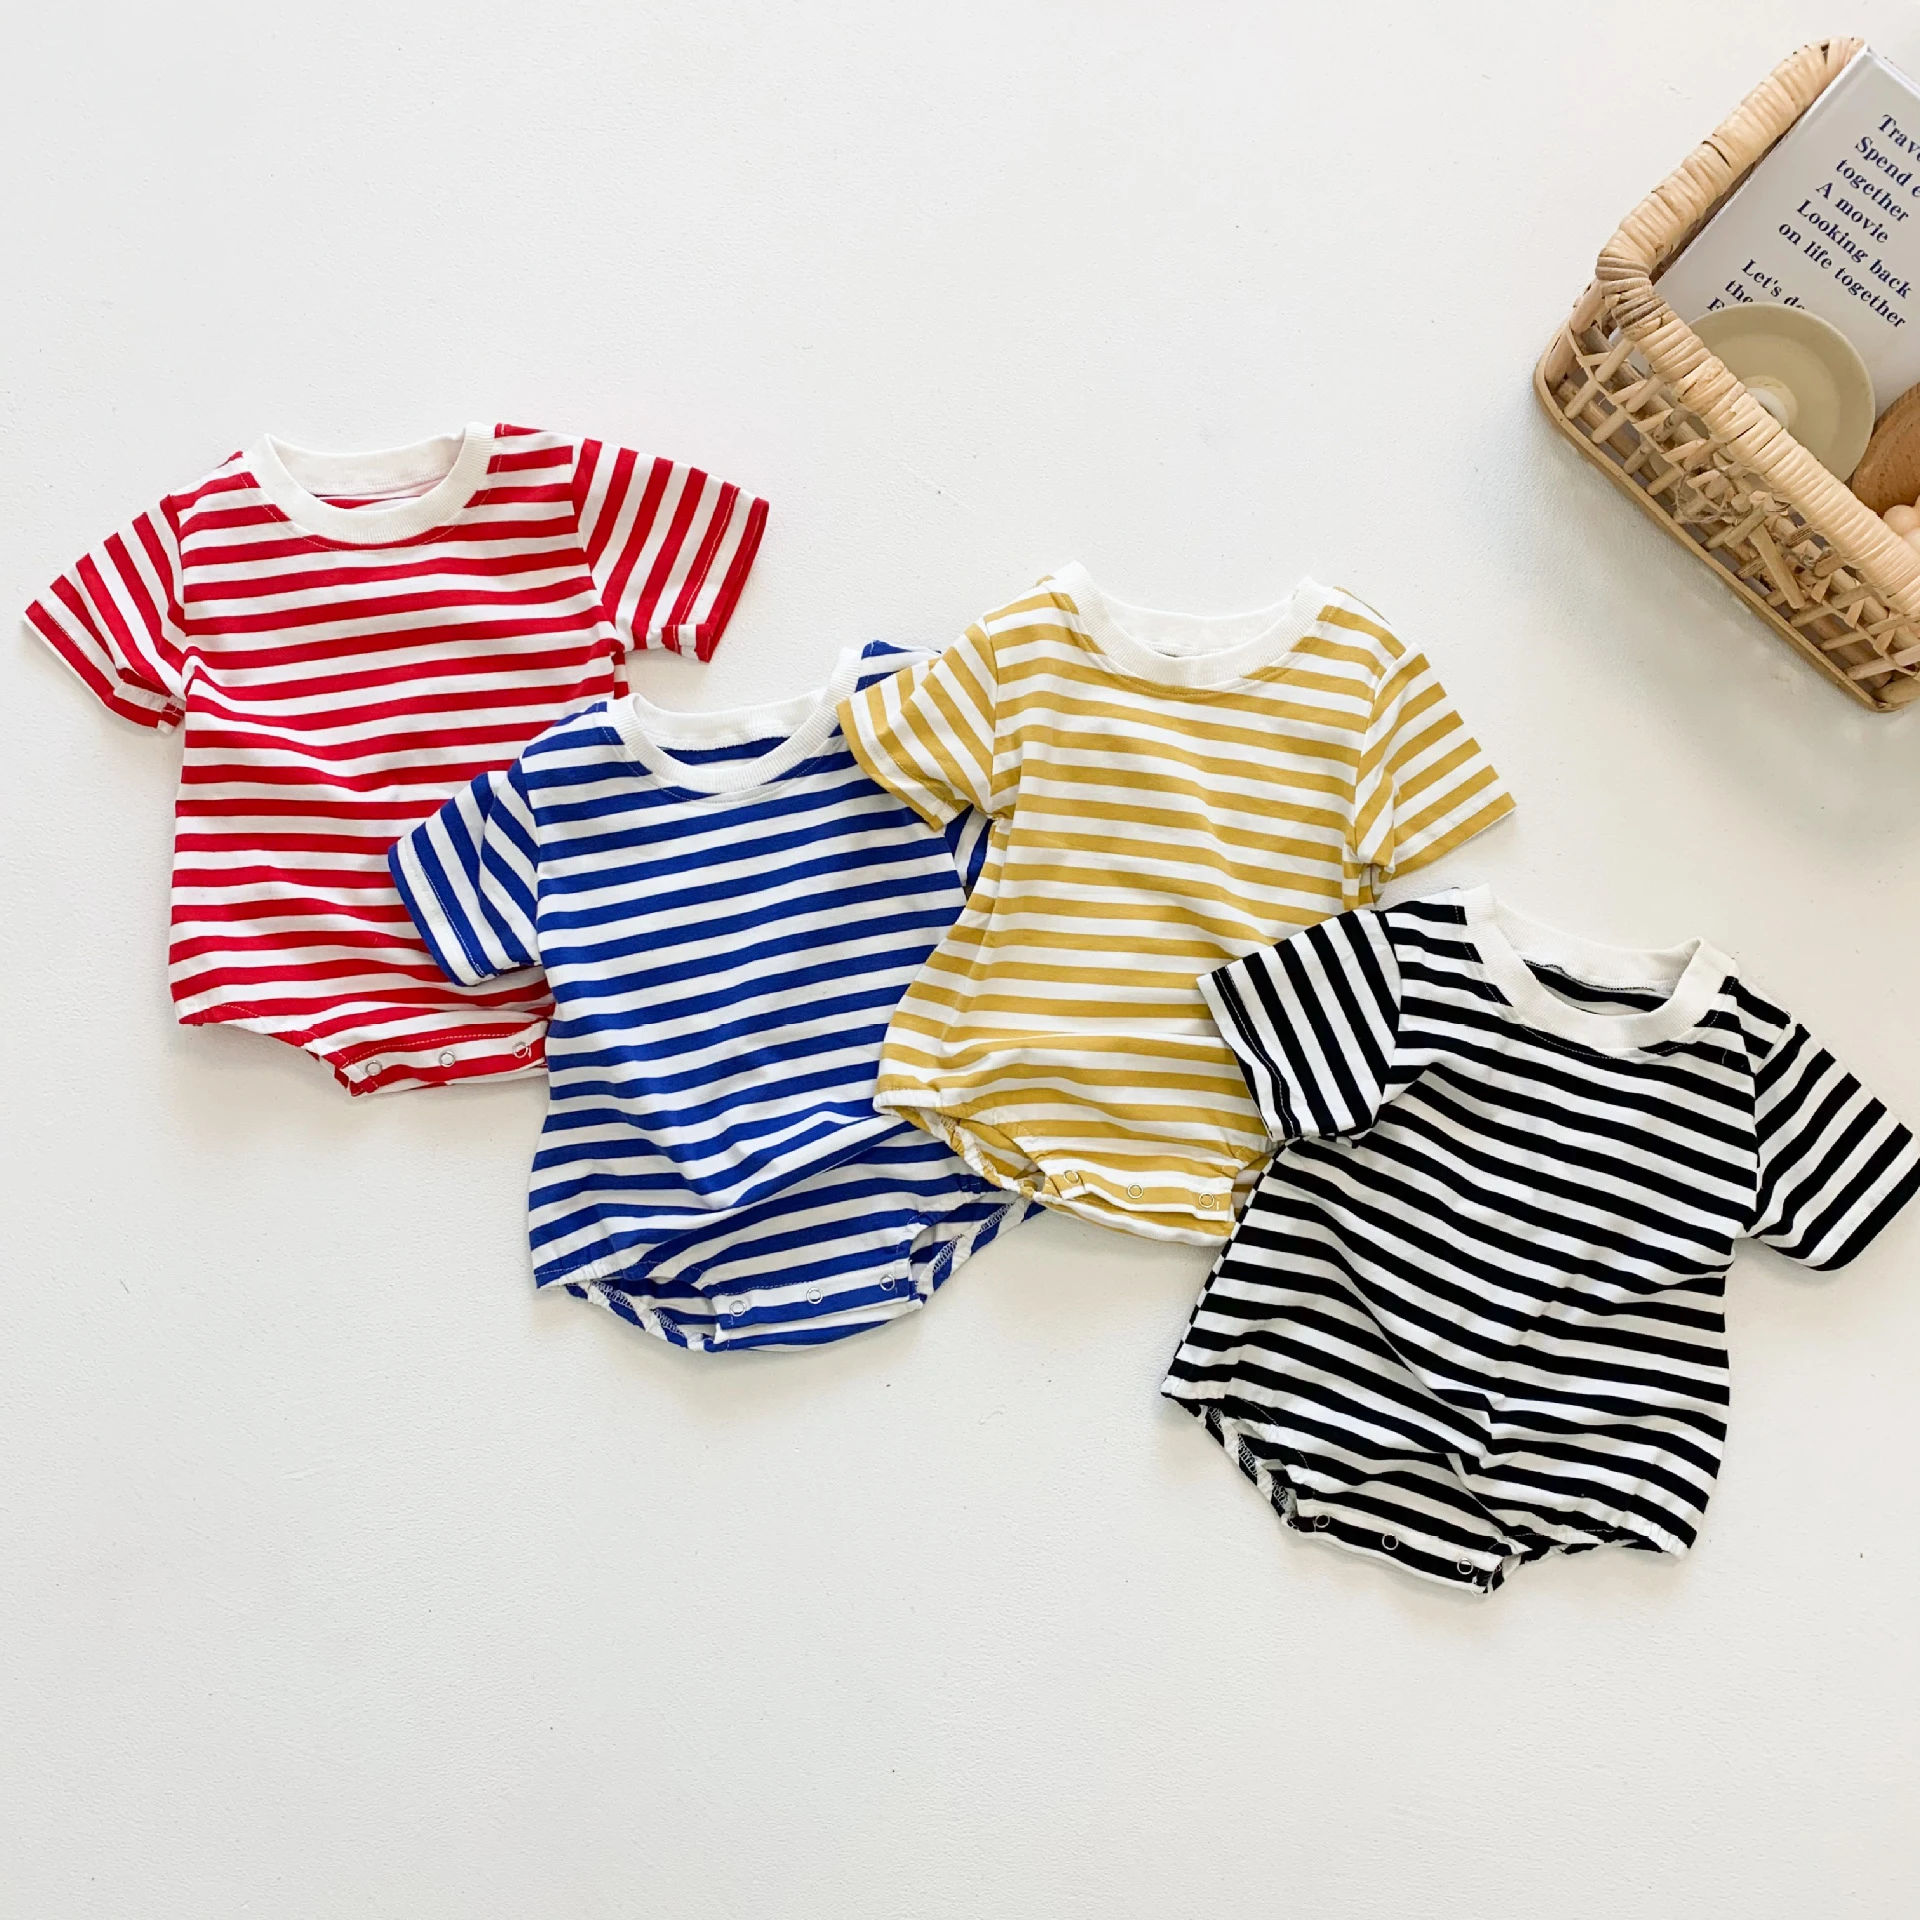 Warm Baby Bodysuits  0-3T Newborn Kid Baby Boys Girls Clothes Short Sleeve Striped Romper Summer Jumpsuit Cute Sweet Cotton New born Body suit Outfit Baby Bodysuits classic